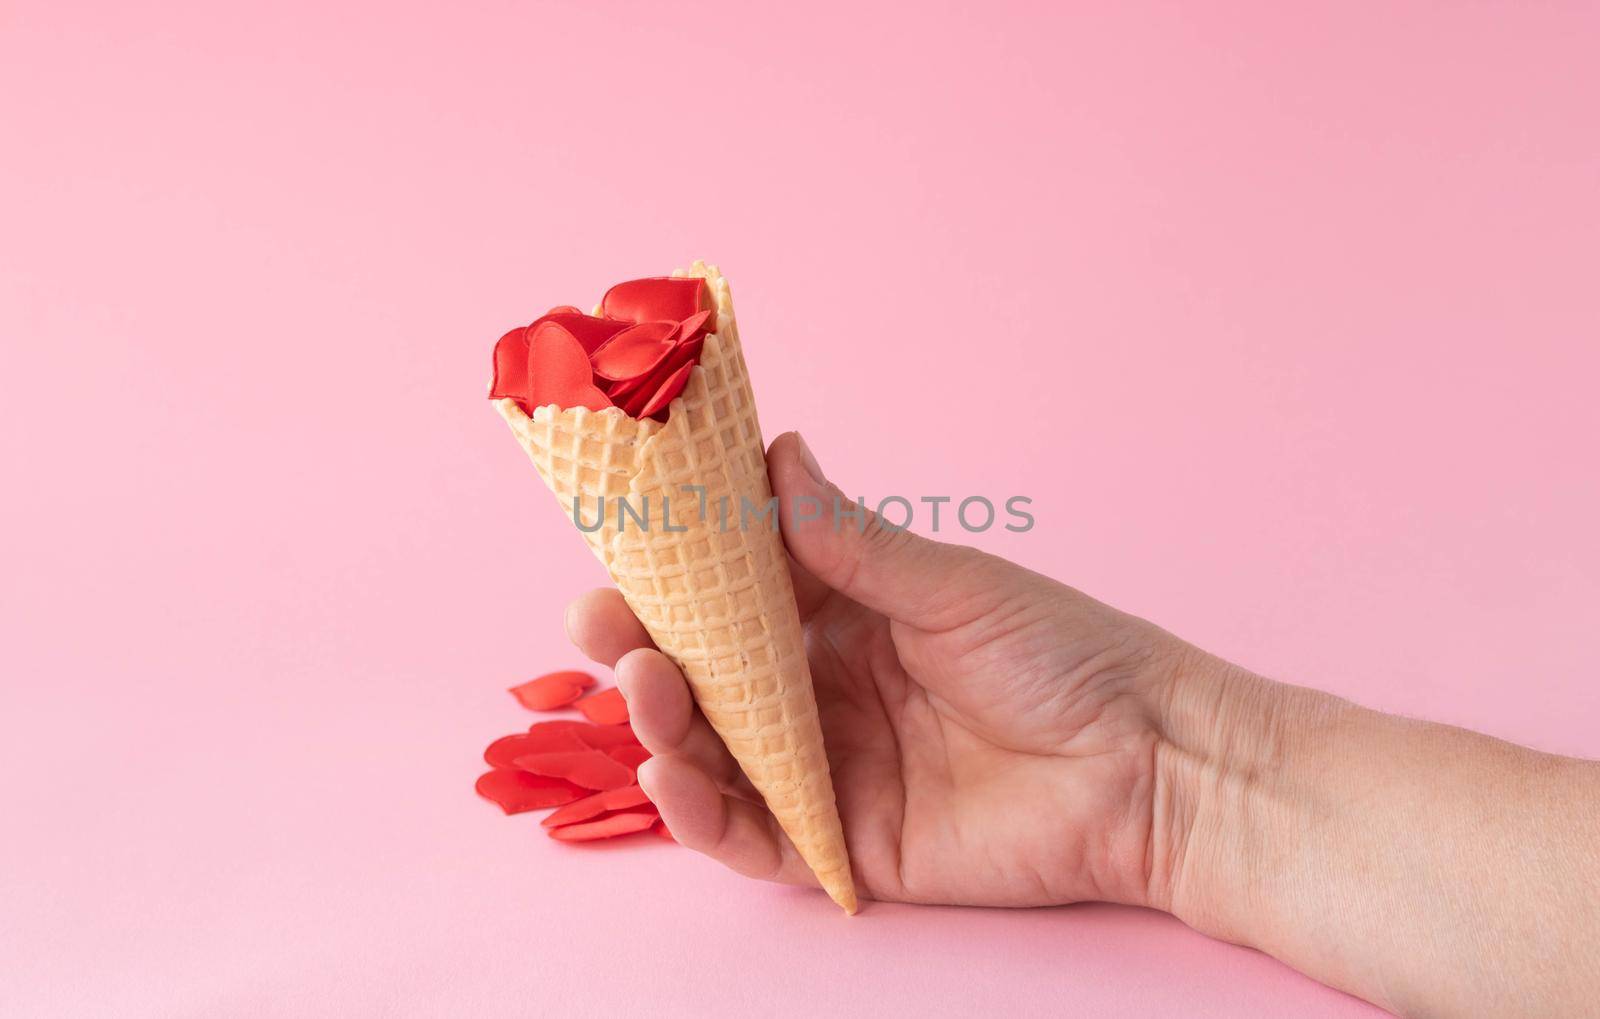 The hand holds an ice cream cone with red hearts. Creative photo of empty waffle cones with scattered red hearts on a pink background. The concept of love, summer, spring by lapushka62